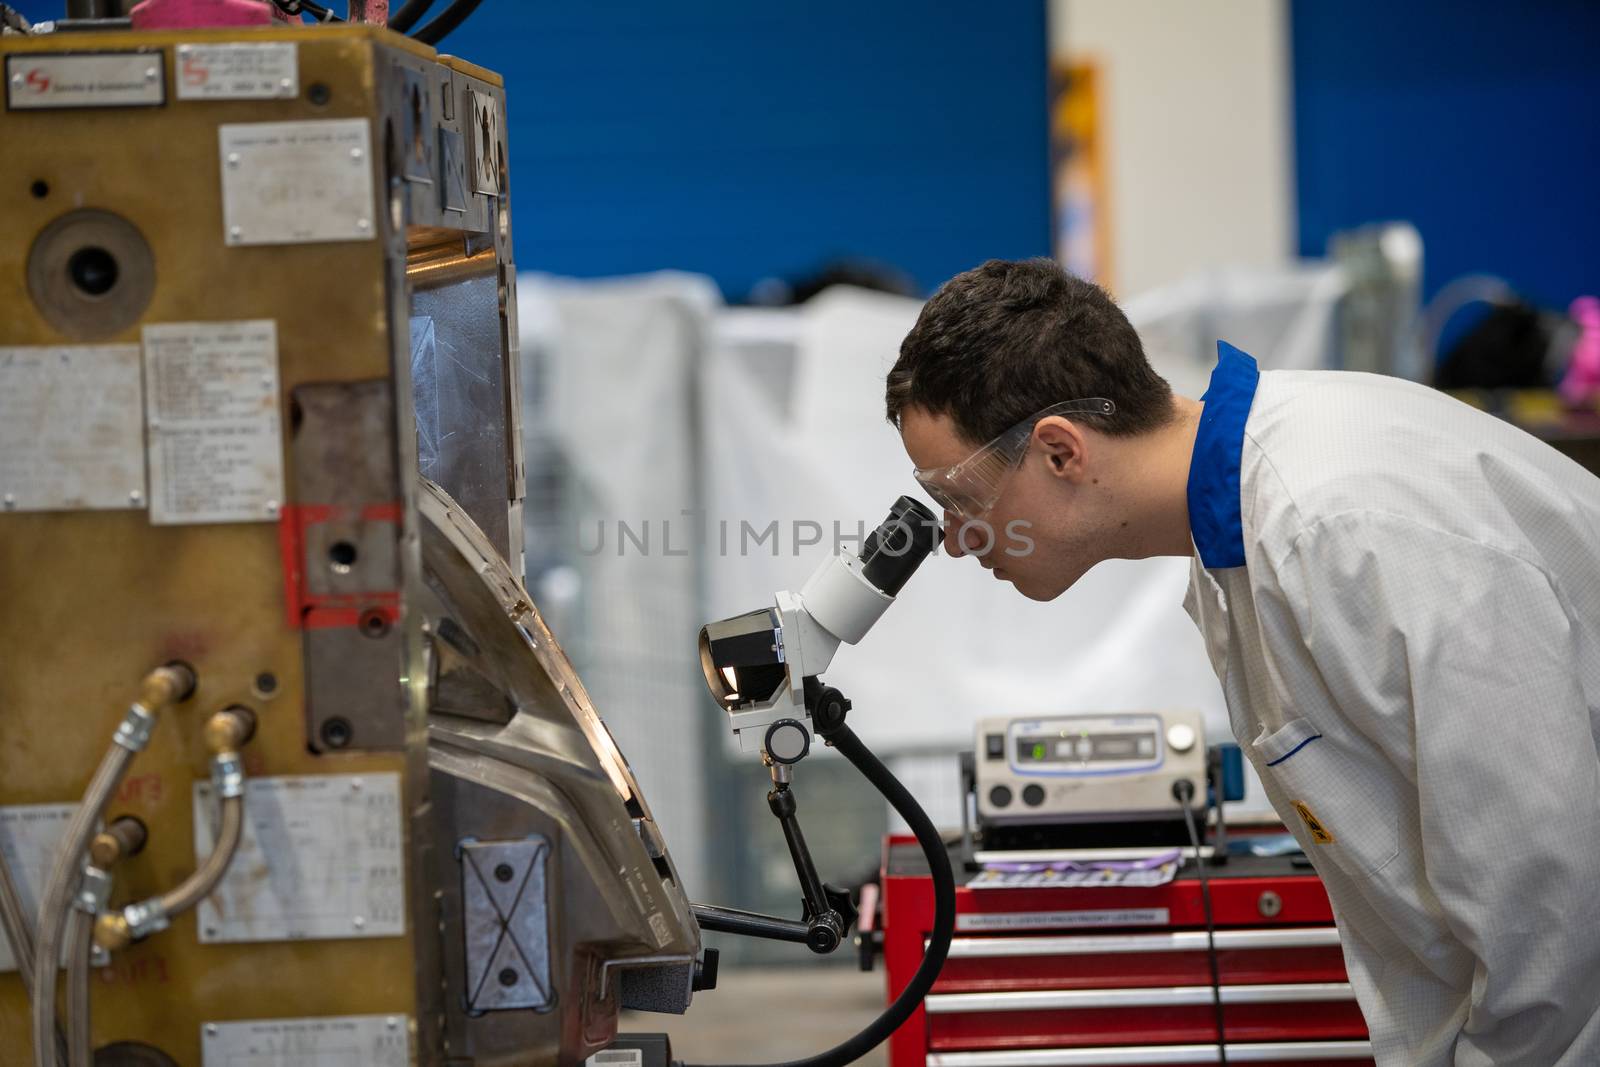 the engineer checks the correct setting of the metal mold for castings in the factory using a microscope.